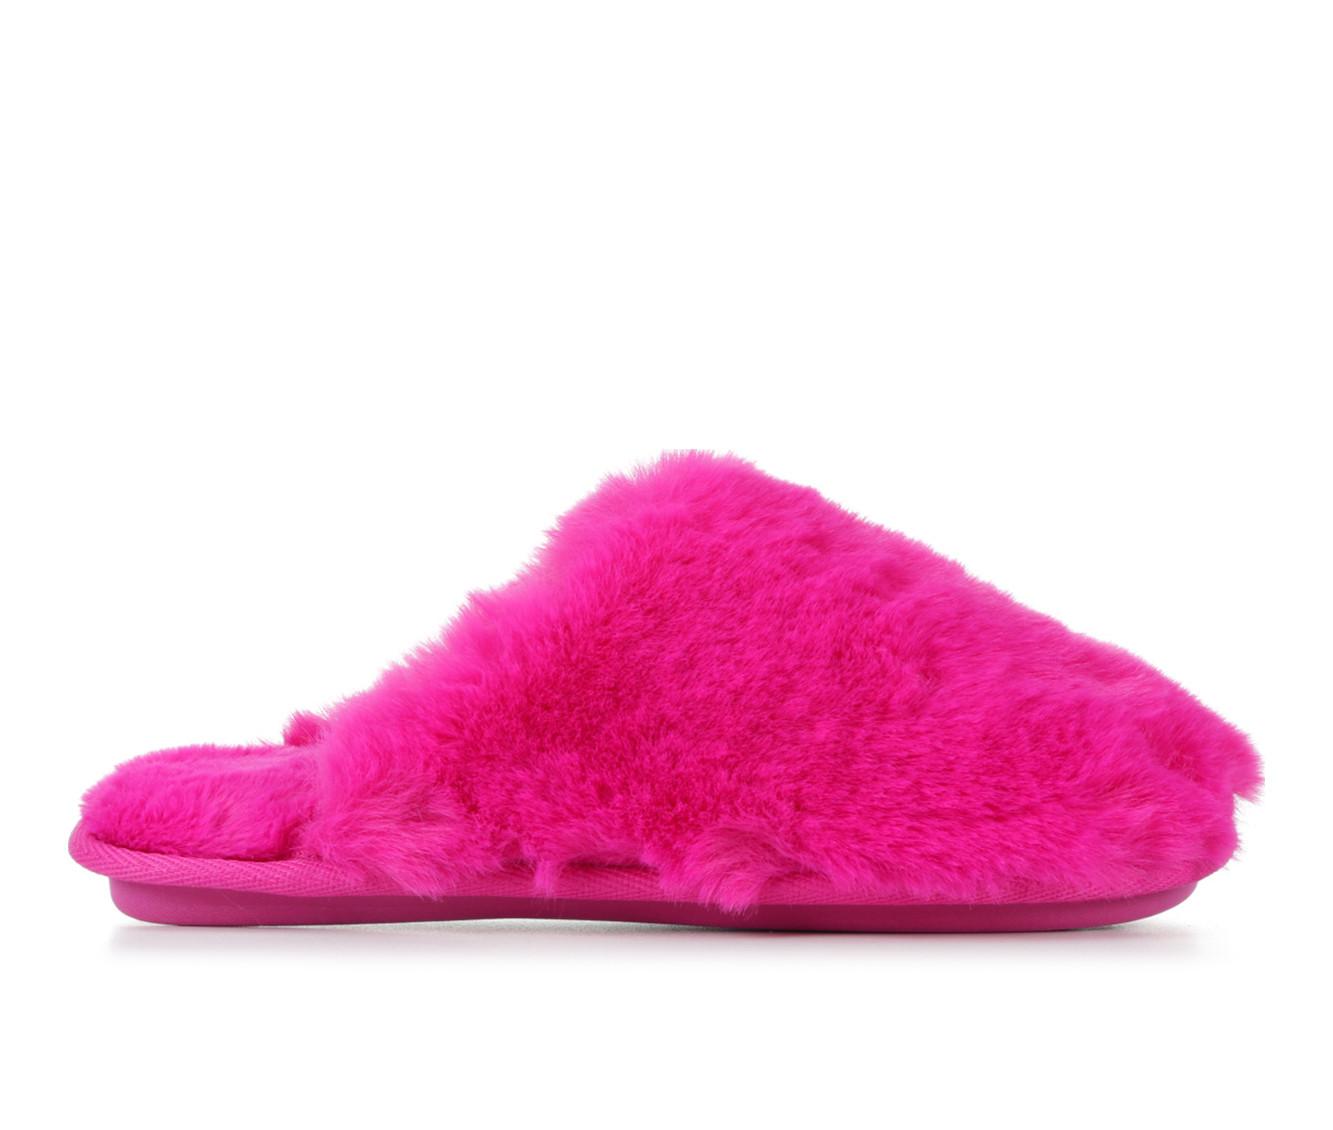 Women's Slippers & House Shoes | Shoe Carnival